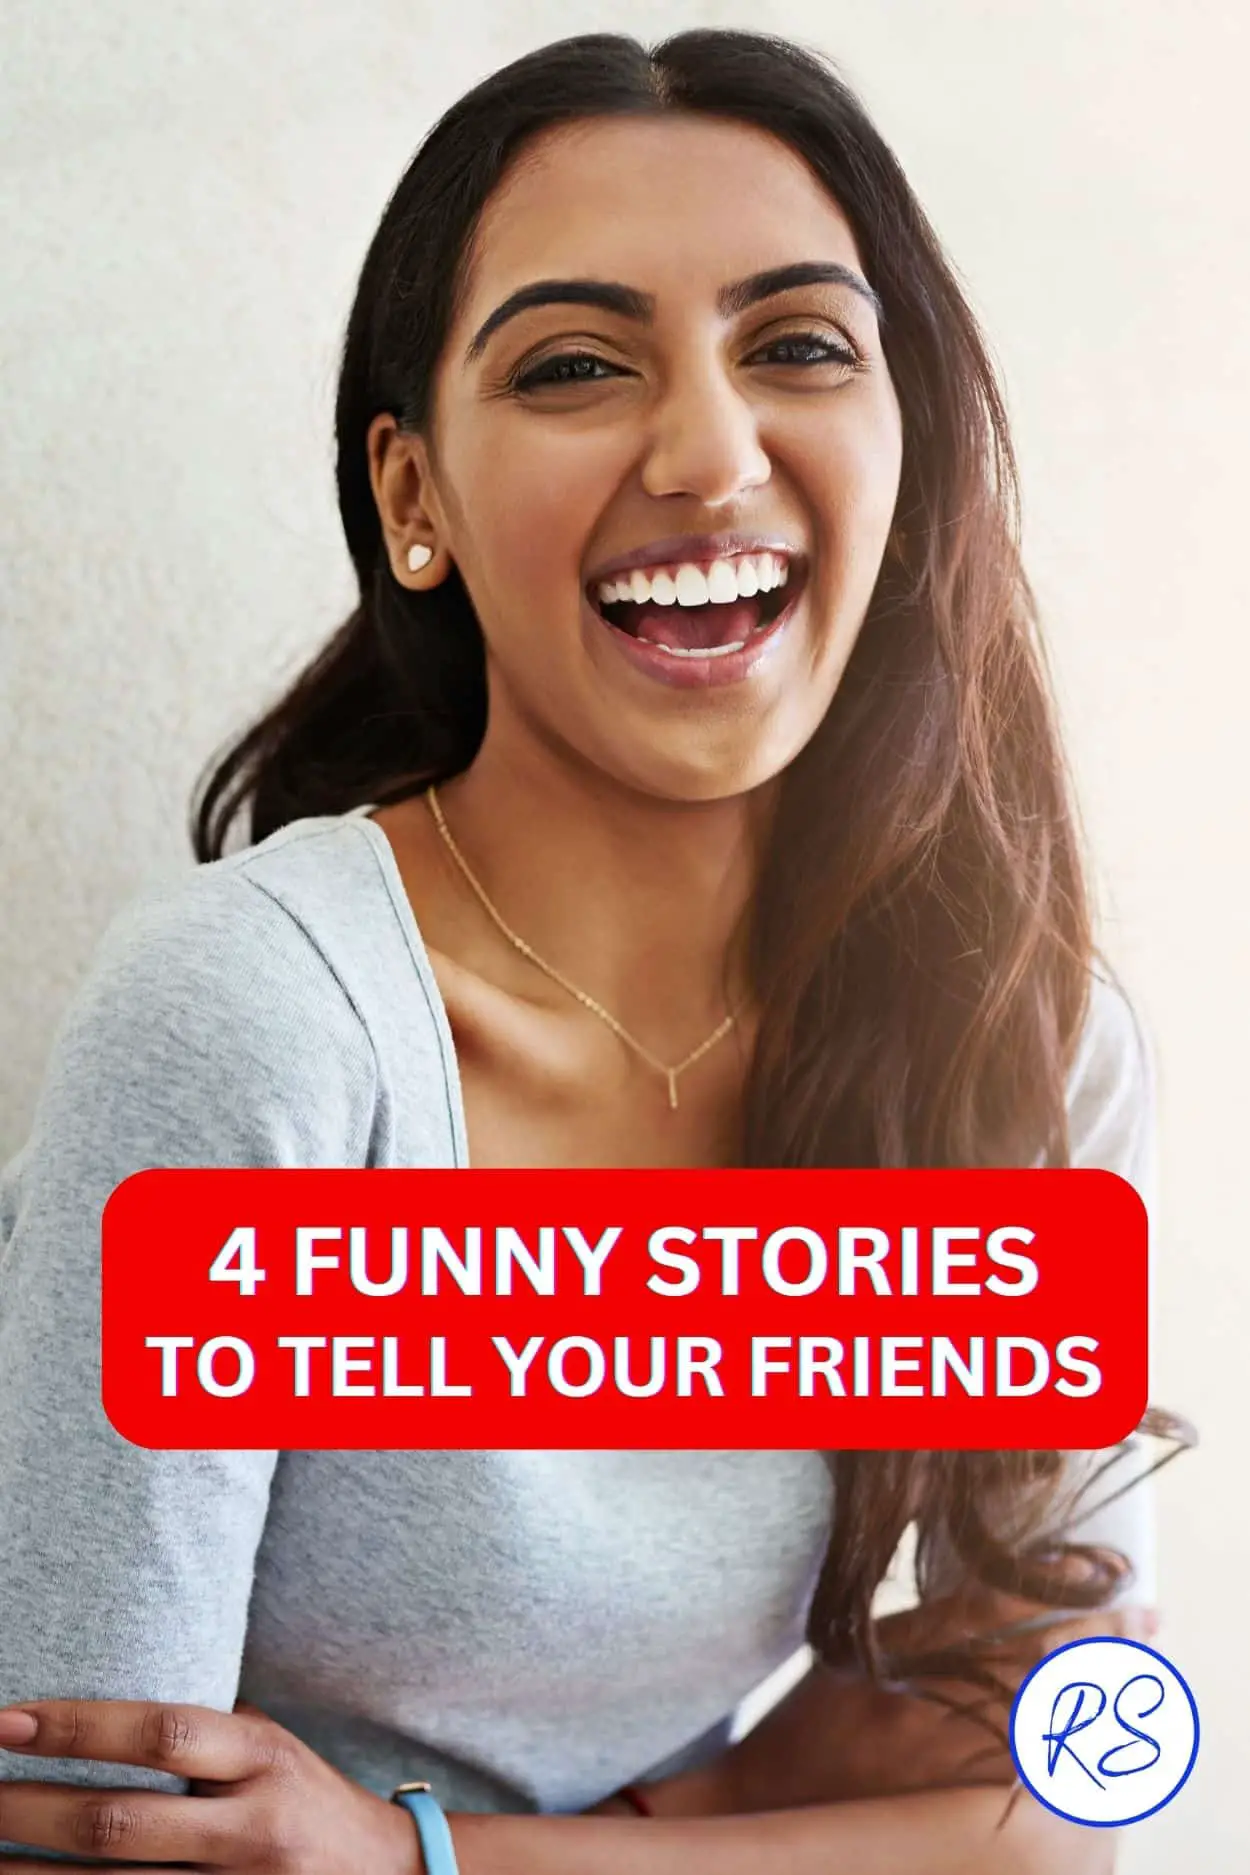 4 funny stories to tell your friends in the bar - Roy Sutton